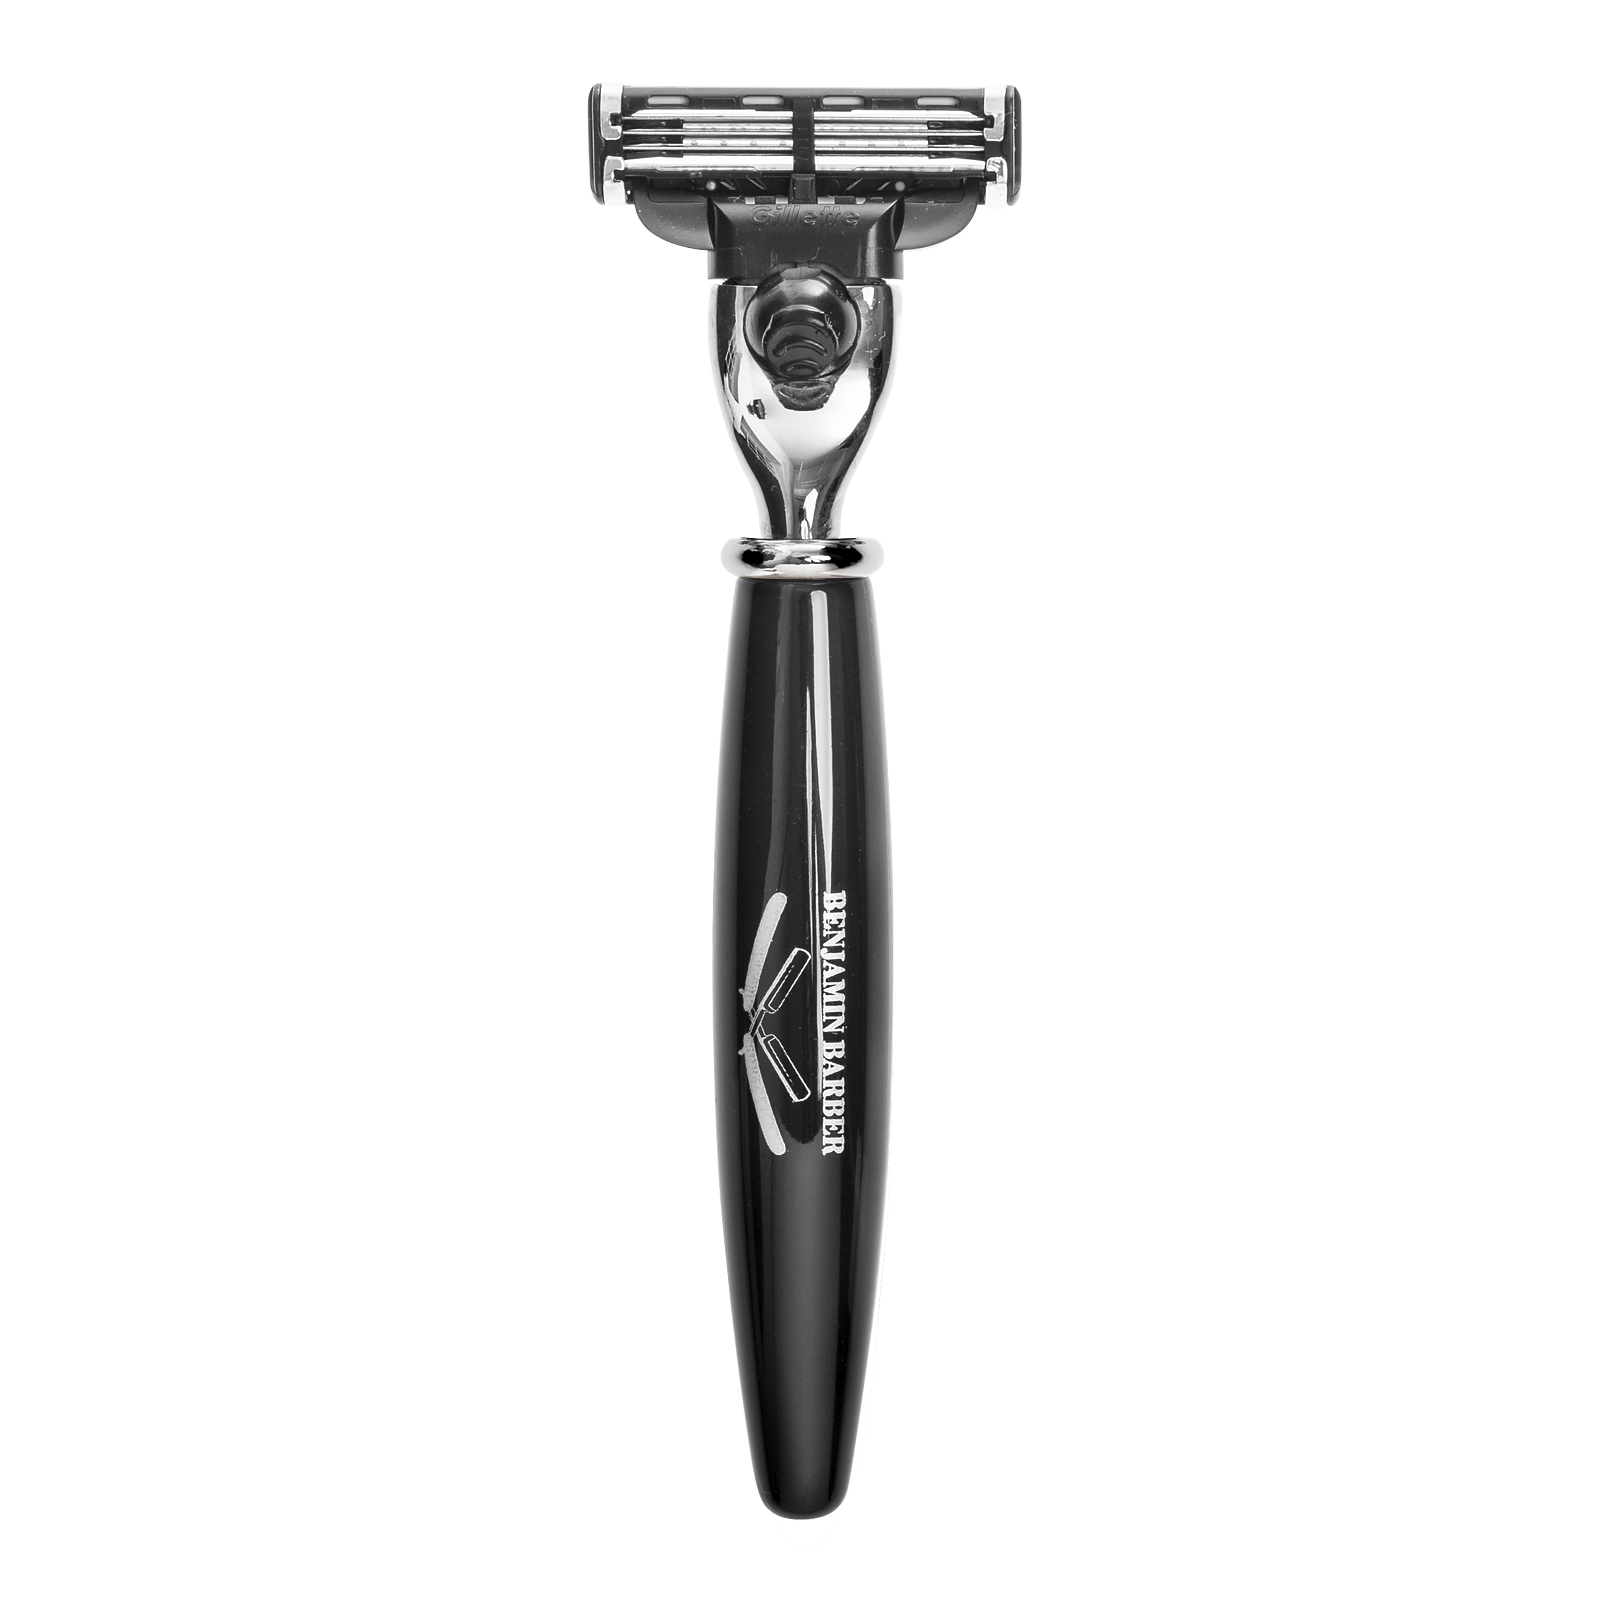 Razor PNG Image High Quality PNG Image